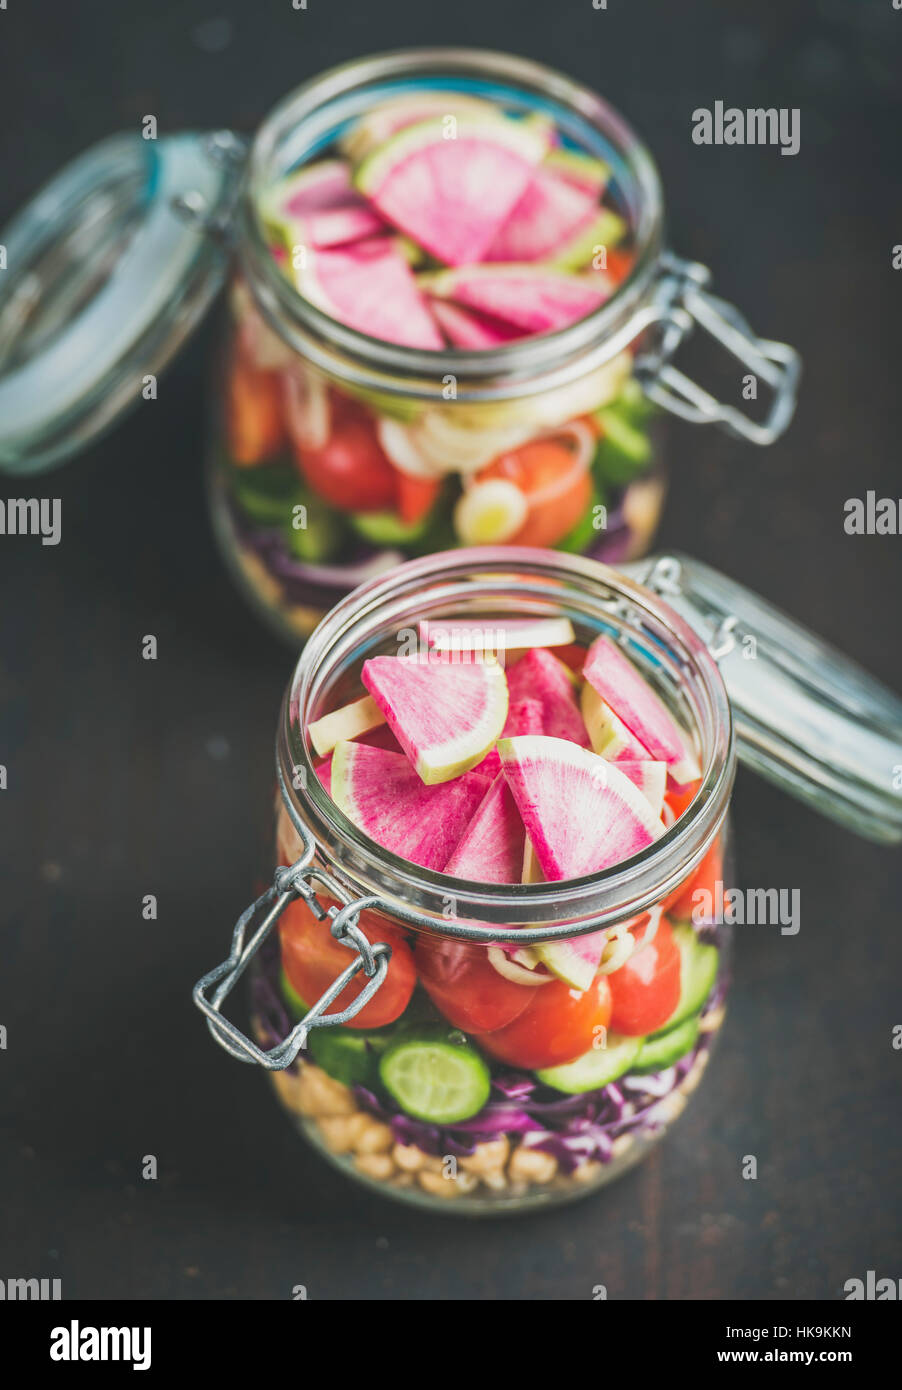 Healthy take-away lunch jars. Vegetable and chickpea sprout layered vegan salad in glass jars over dark scorched wooden background, selective focus. C Stock Photo